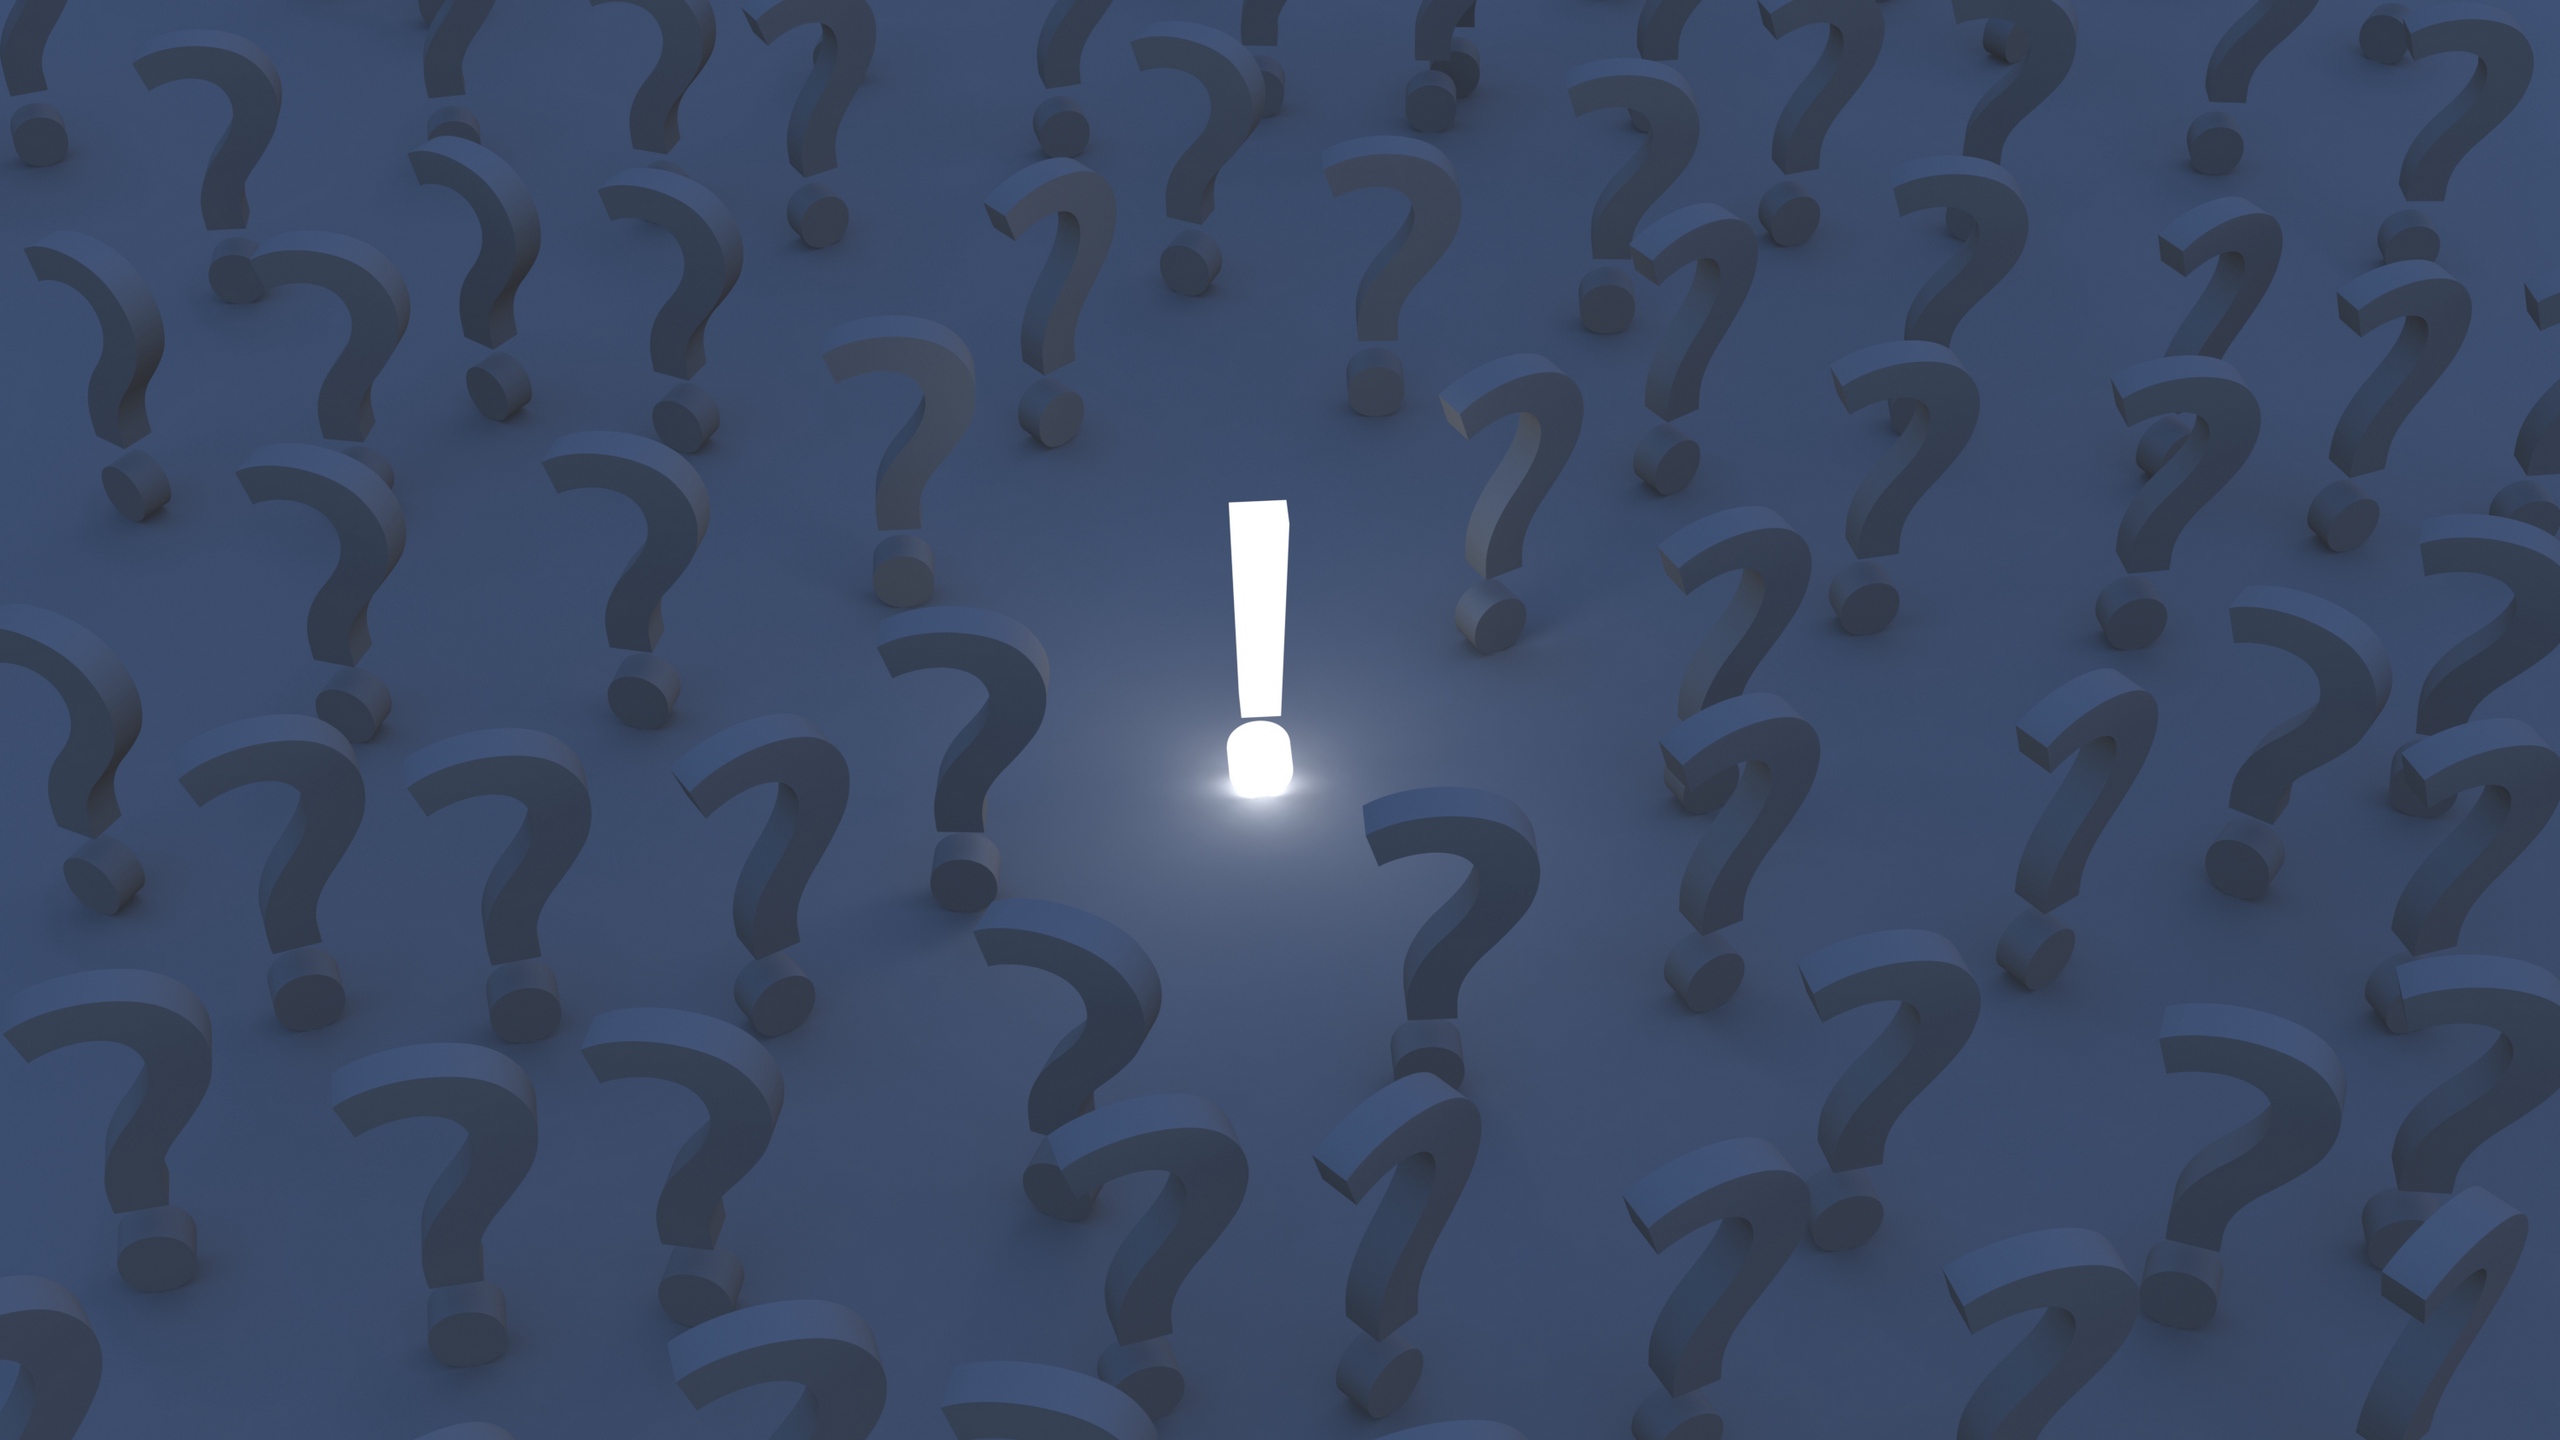 Wallpaper Exclamation Mark, Question Mark, Signs - Number - HD Wallpaper 